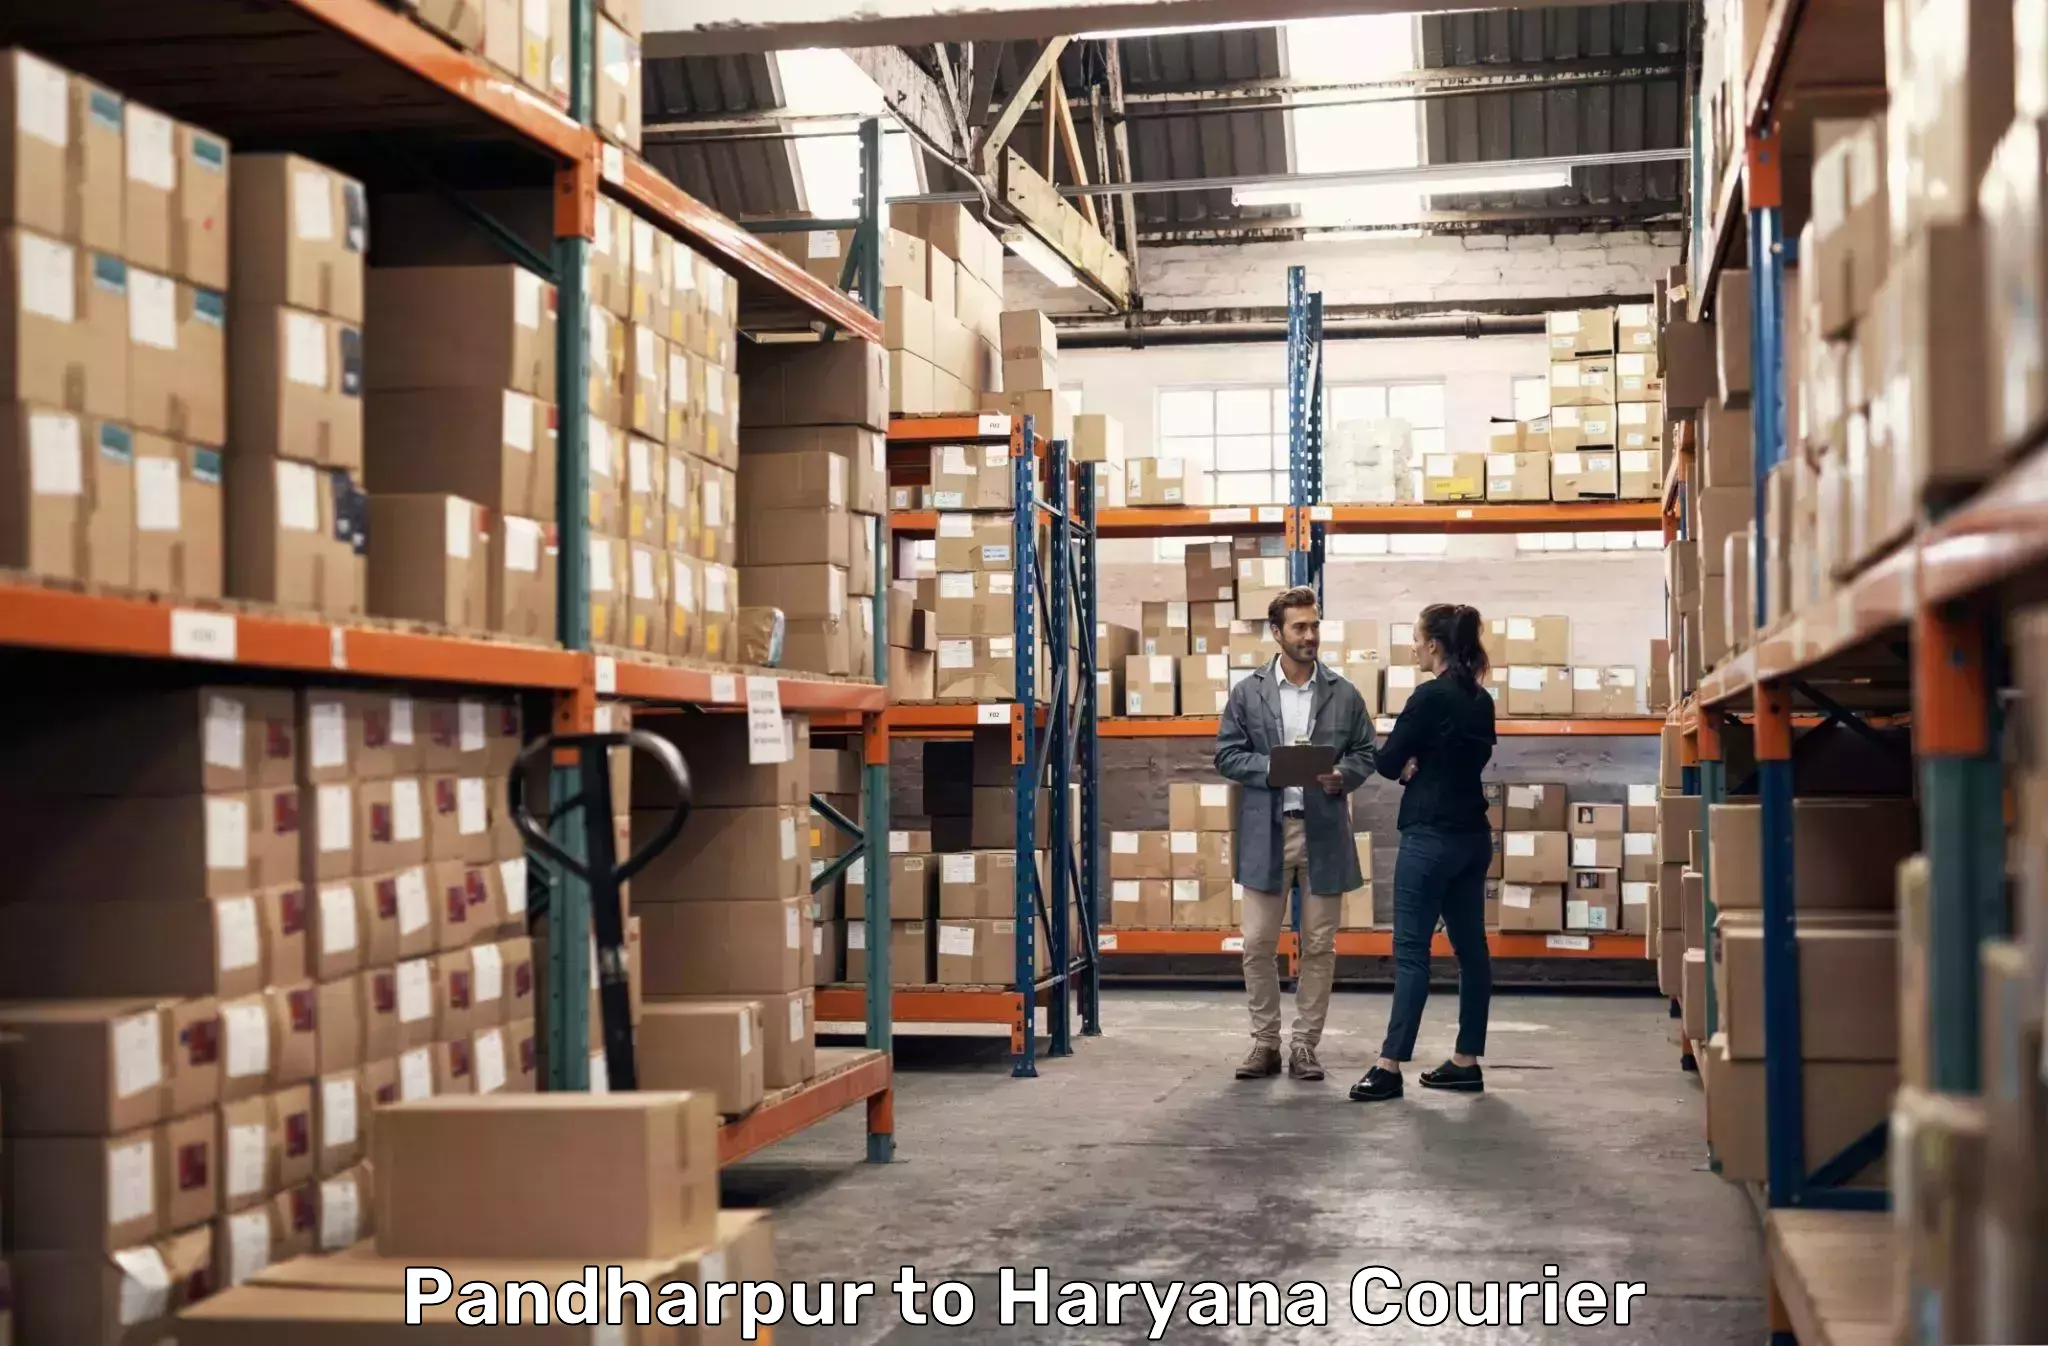 Express delivery network in Pandharpur to Bilaspur Haryana